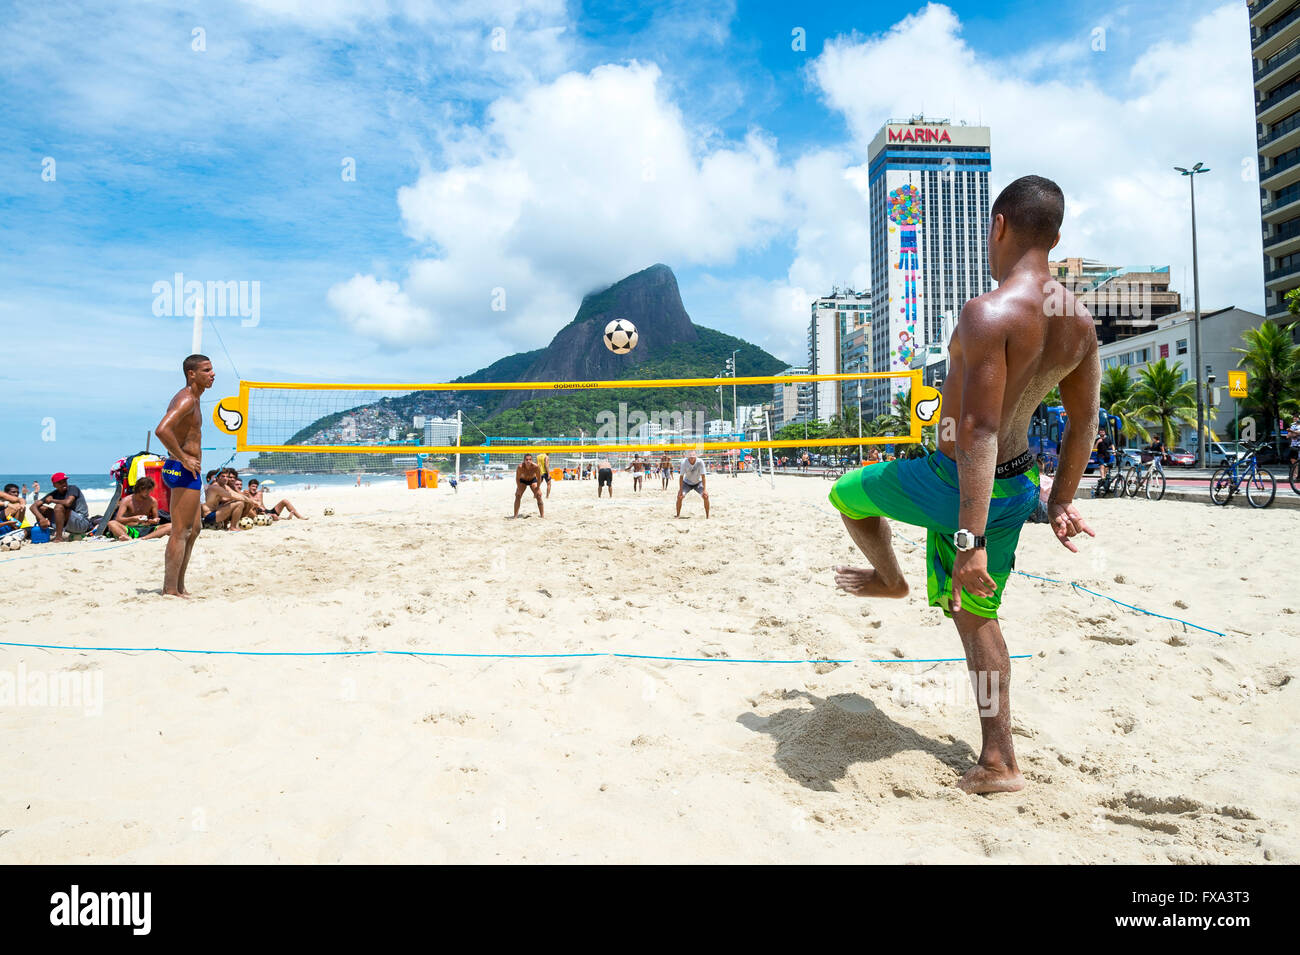 RIO DE JANEIRO - MARCH 17, 2016: Young Brazilian men play a game of footvolley, a sport that combines football and volleyball. Stock Photo